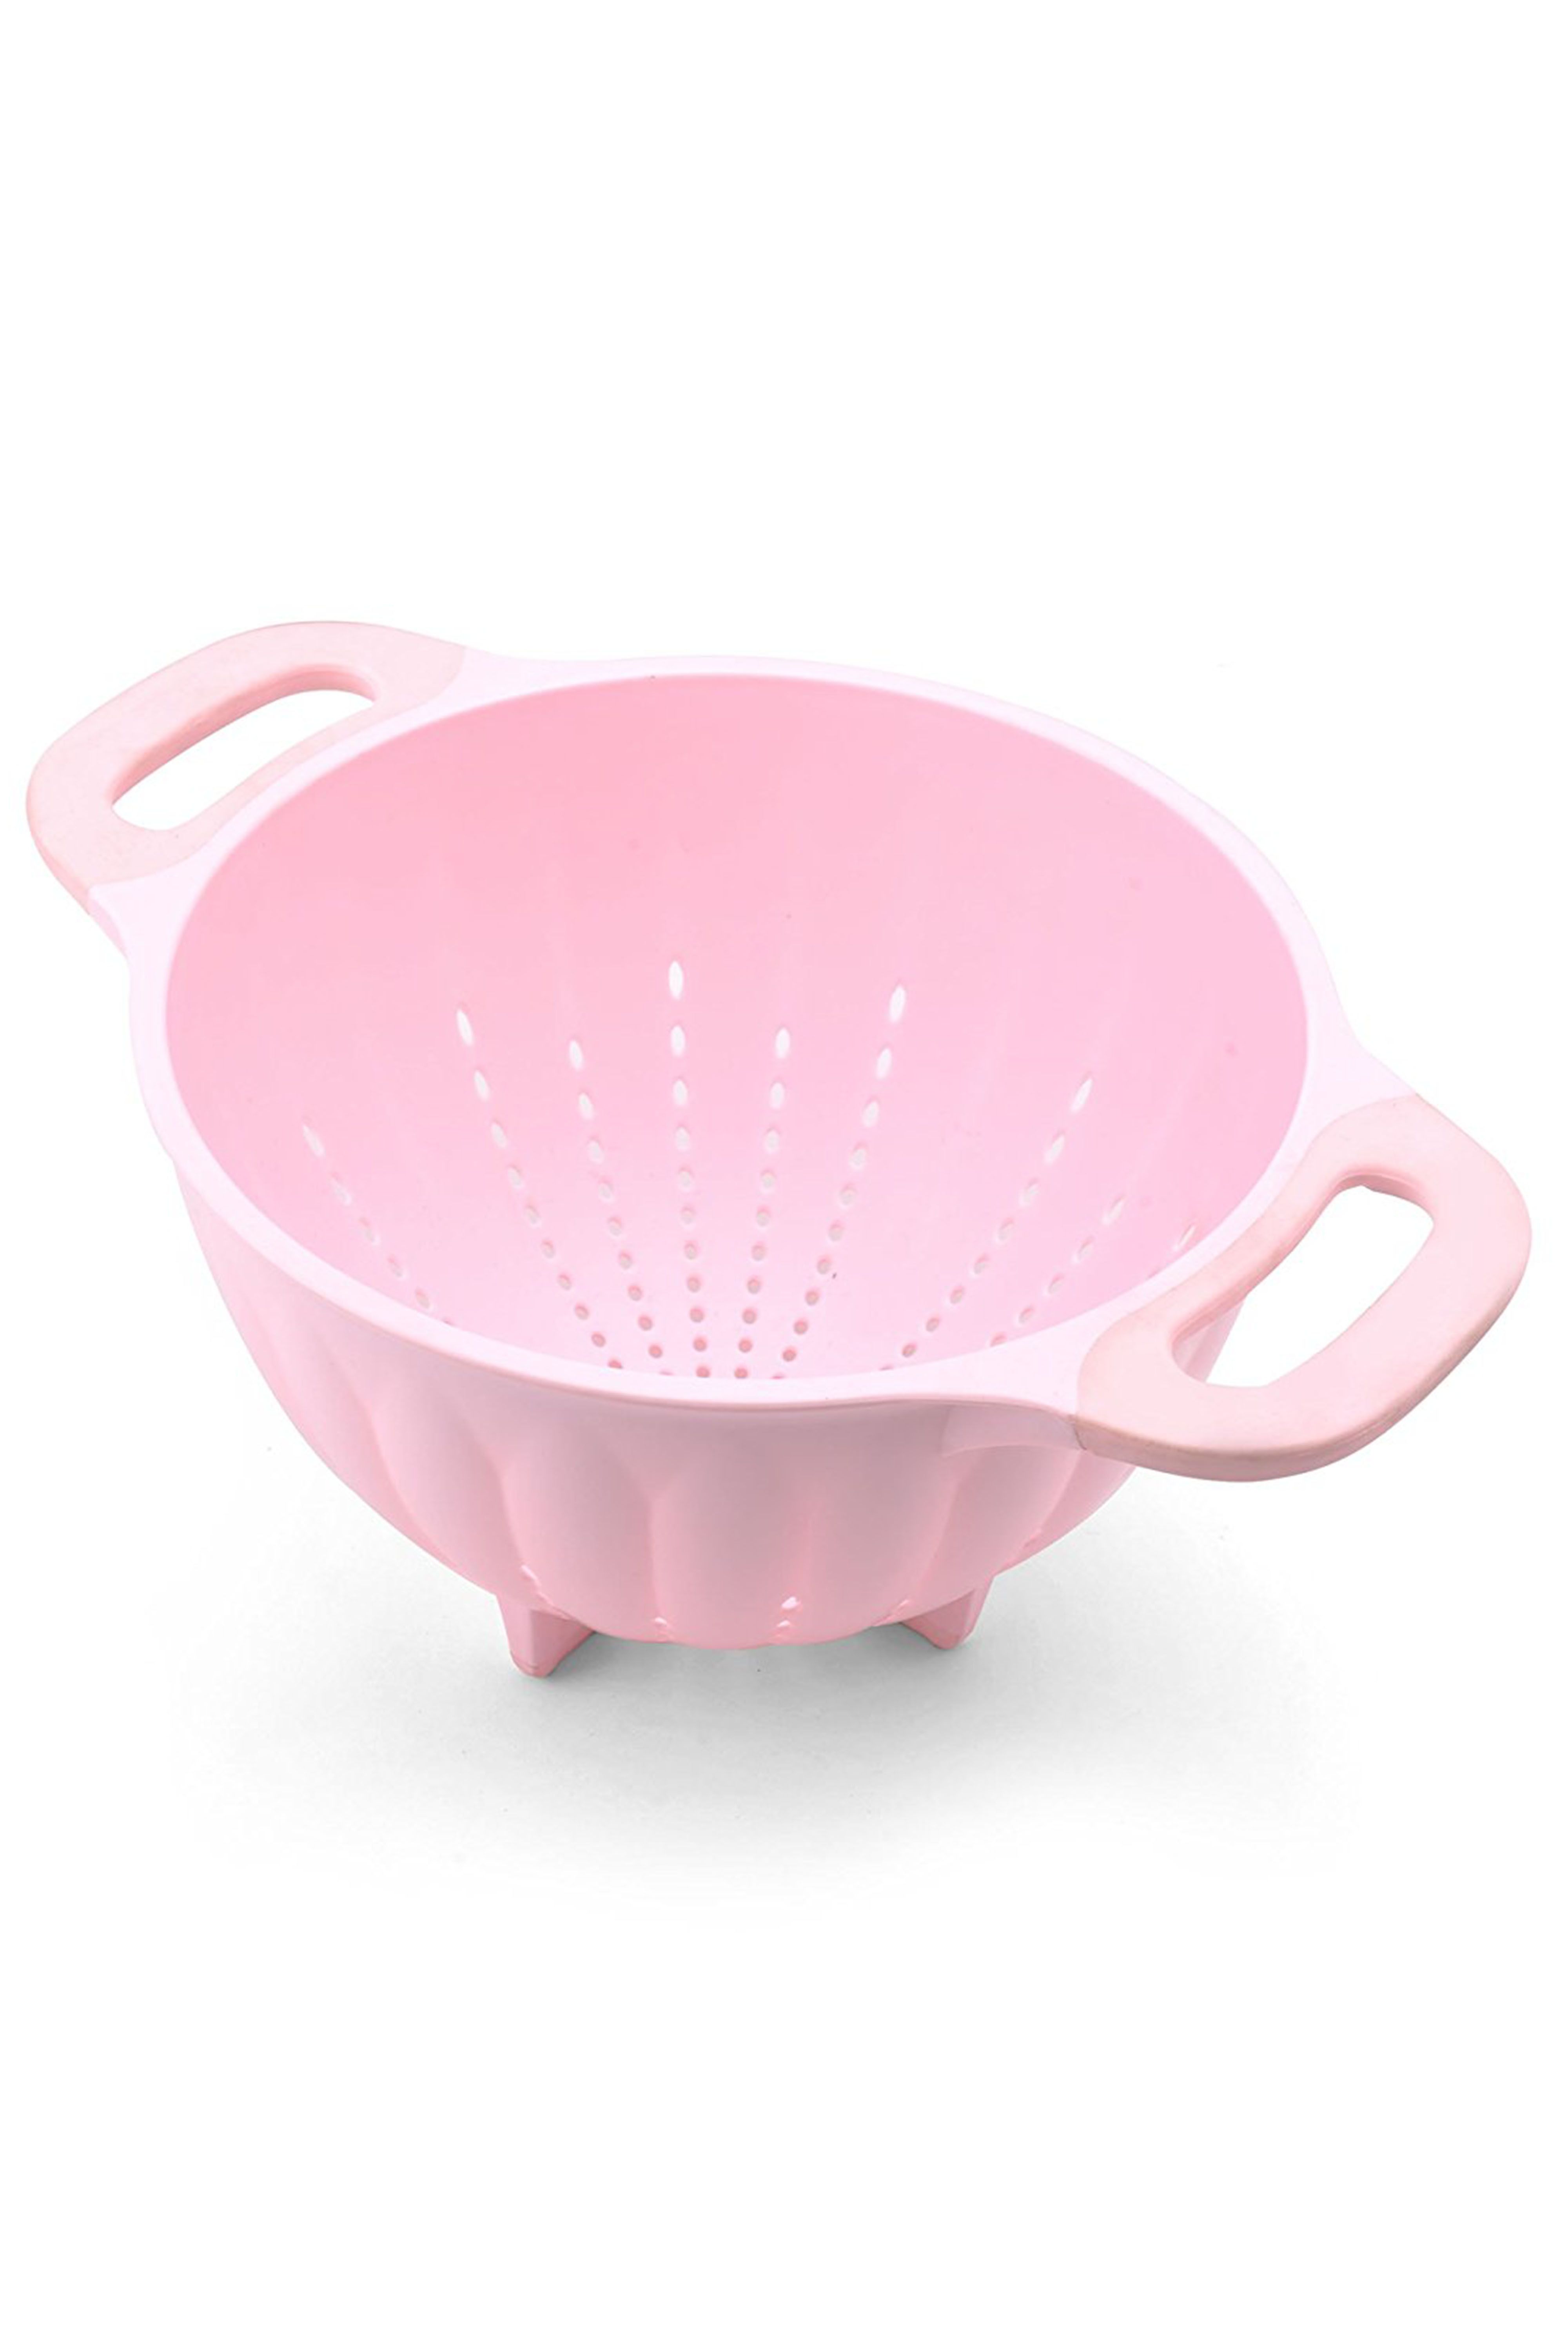 Pink Kitchen Accessories For Your Home (These Make Great Gifts!)